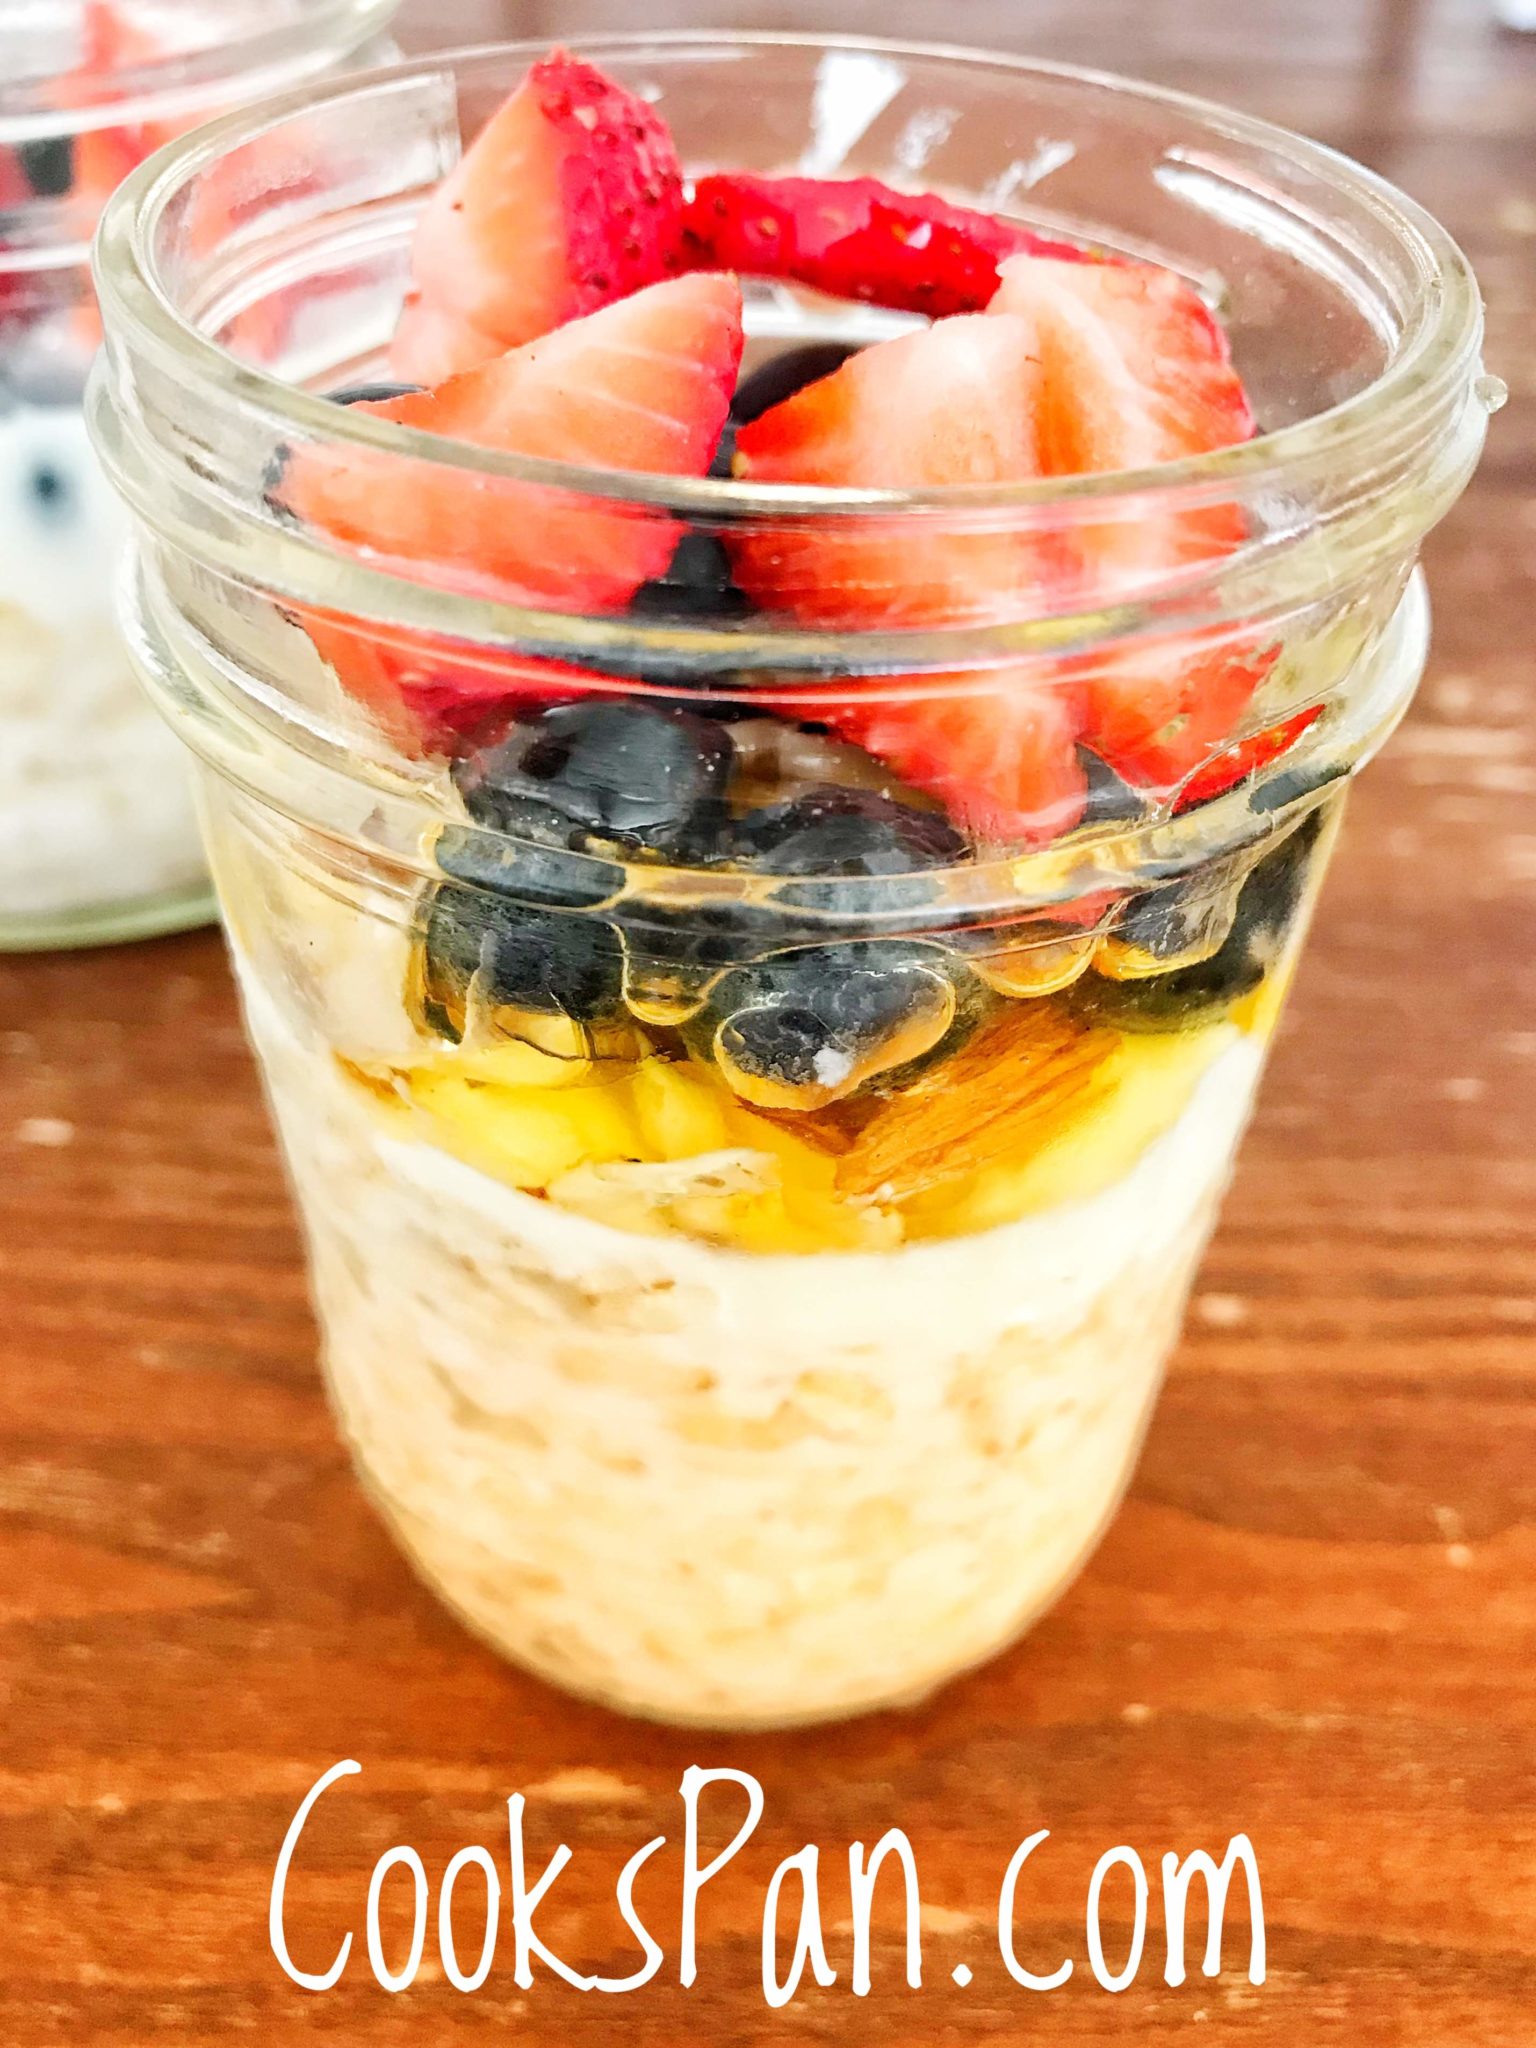 Overnight Oats with Berries and almonds